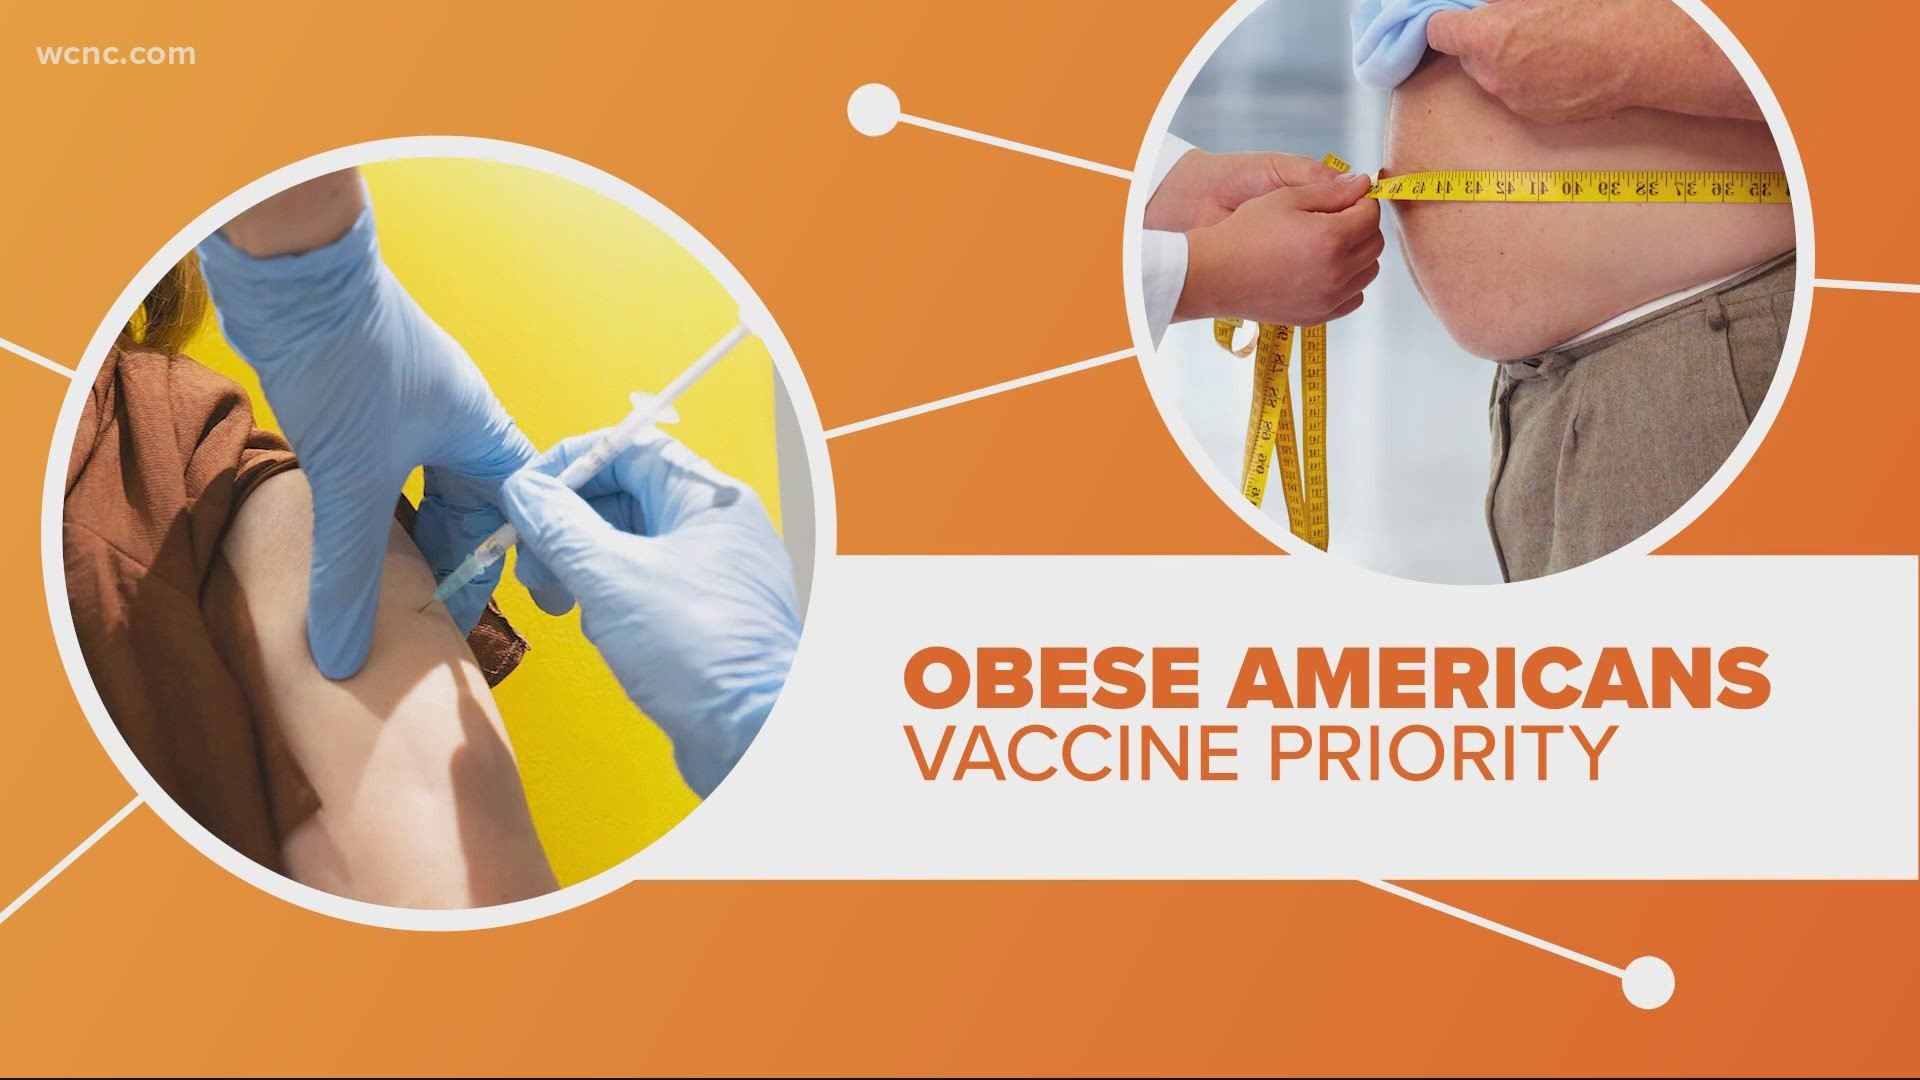 A CDC advisory board will meet this week to determine who should get the COVID-19 vaccine first. And a priority could be determined by patients' weight.